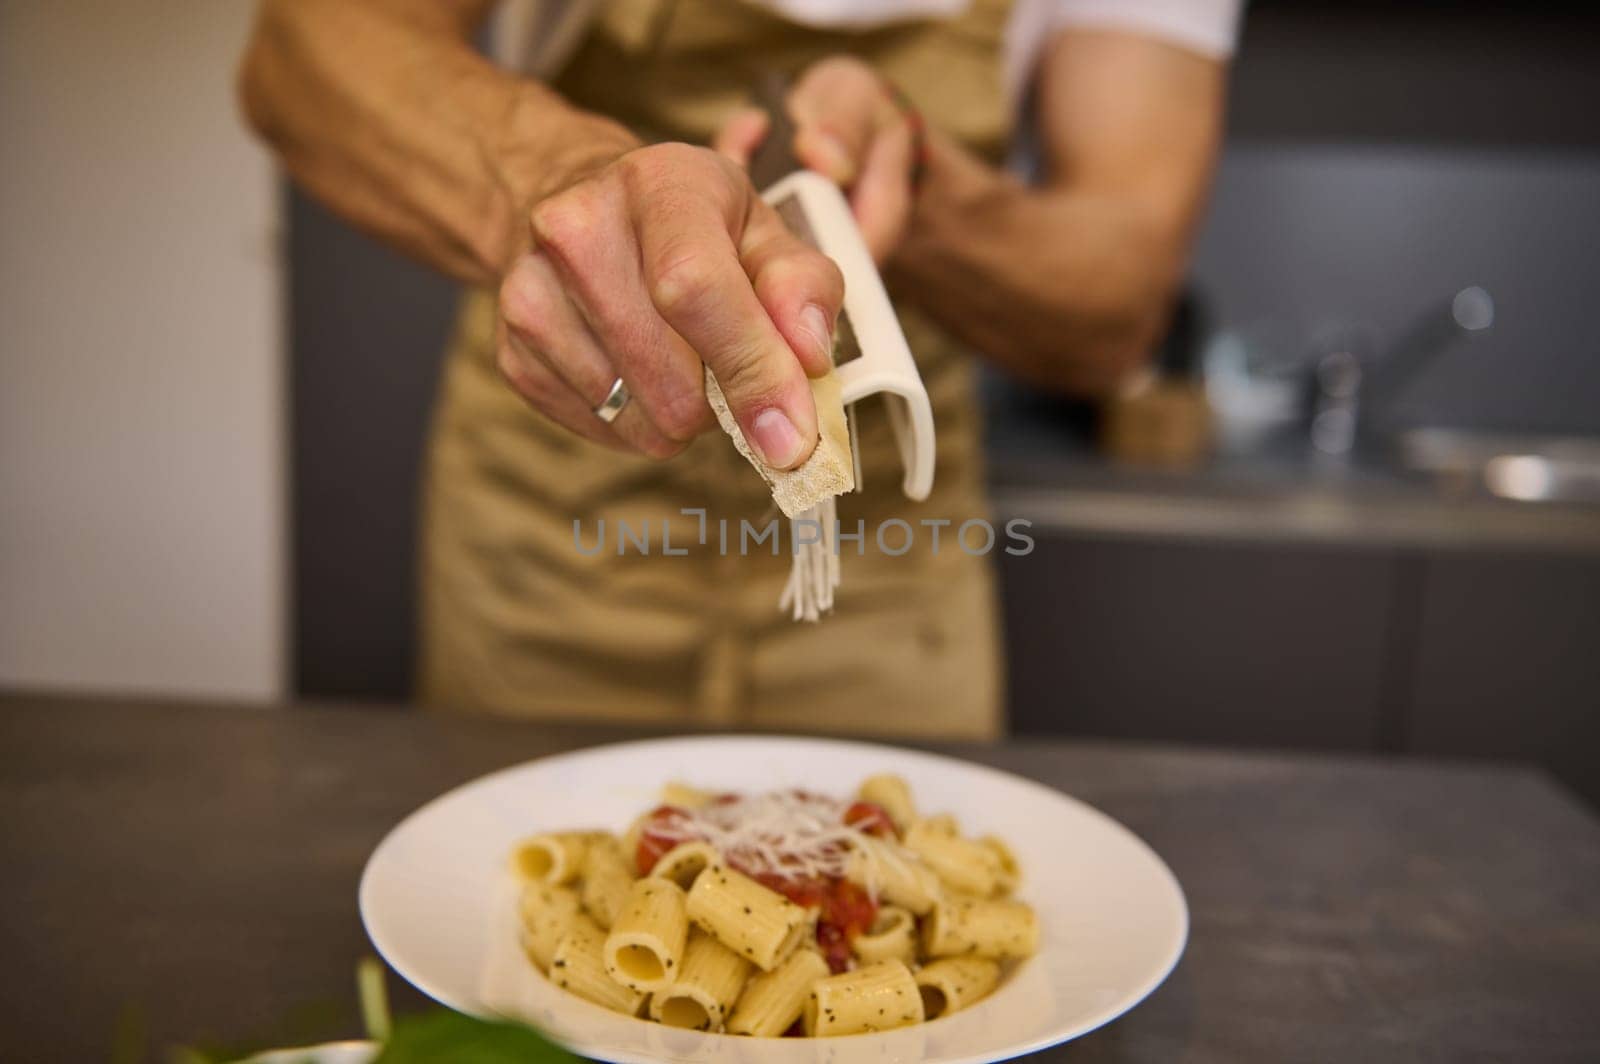 Selective focus on hands of male chef in an beige apron, grating parmesan cheese into a dish of spaghetti with tomato sauce, cooking dinner according to traditional Italian recipe in the home kitchen.